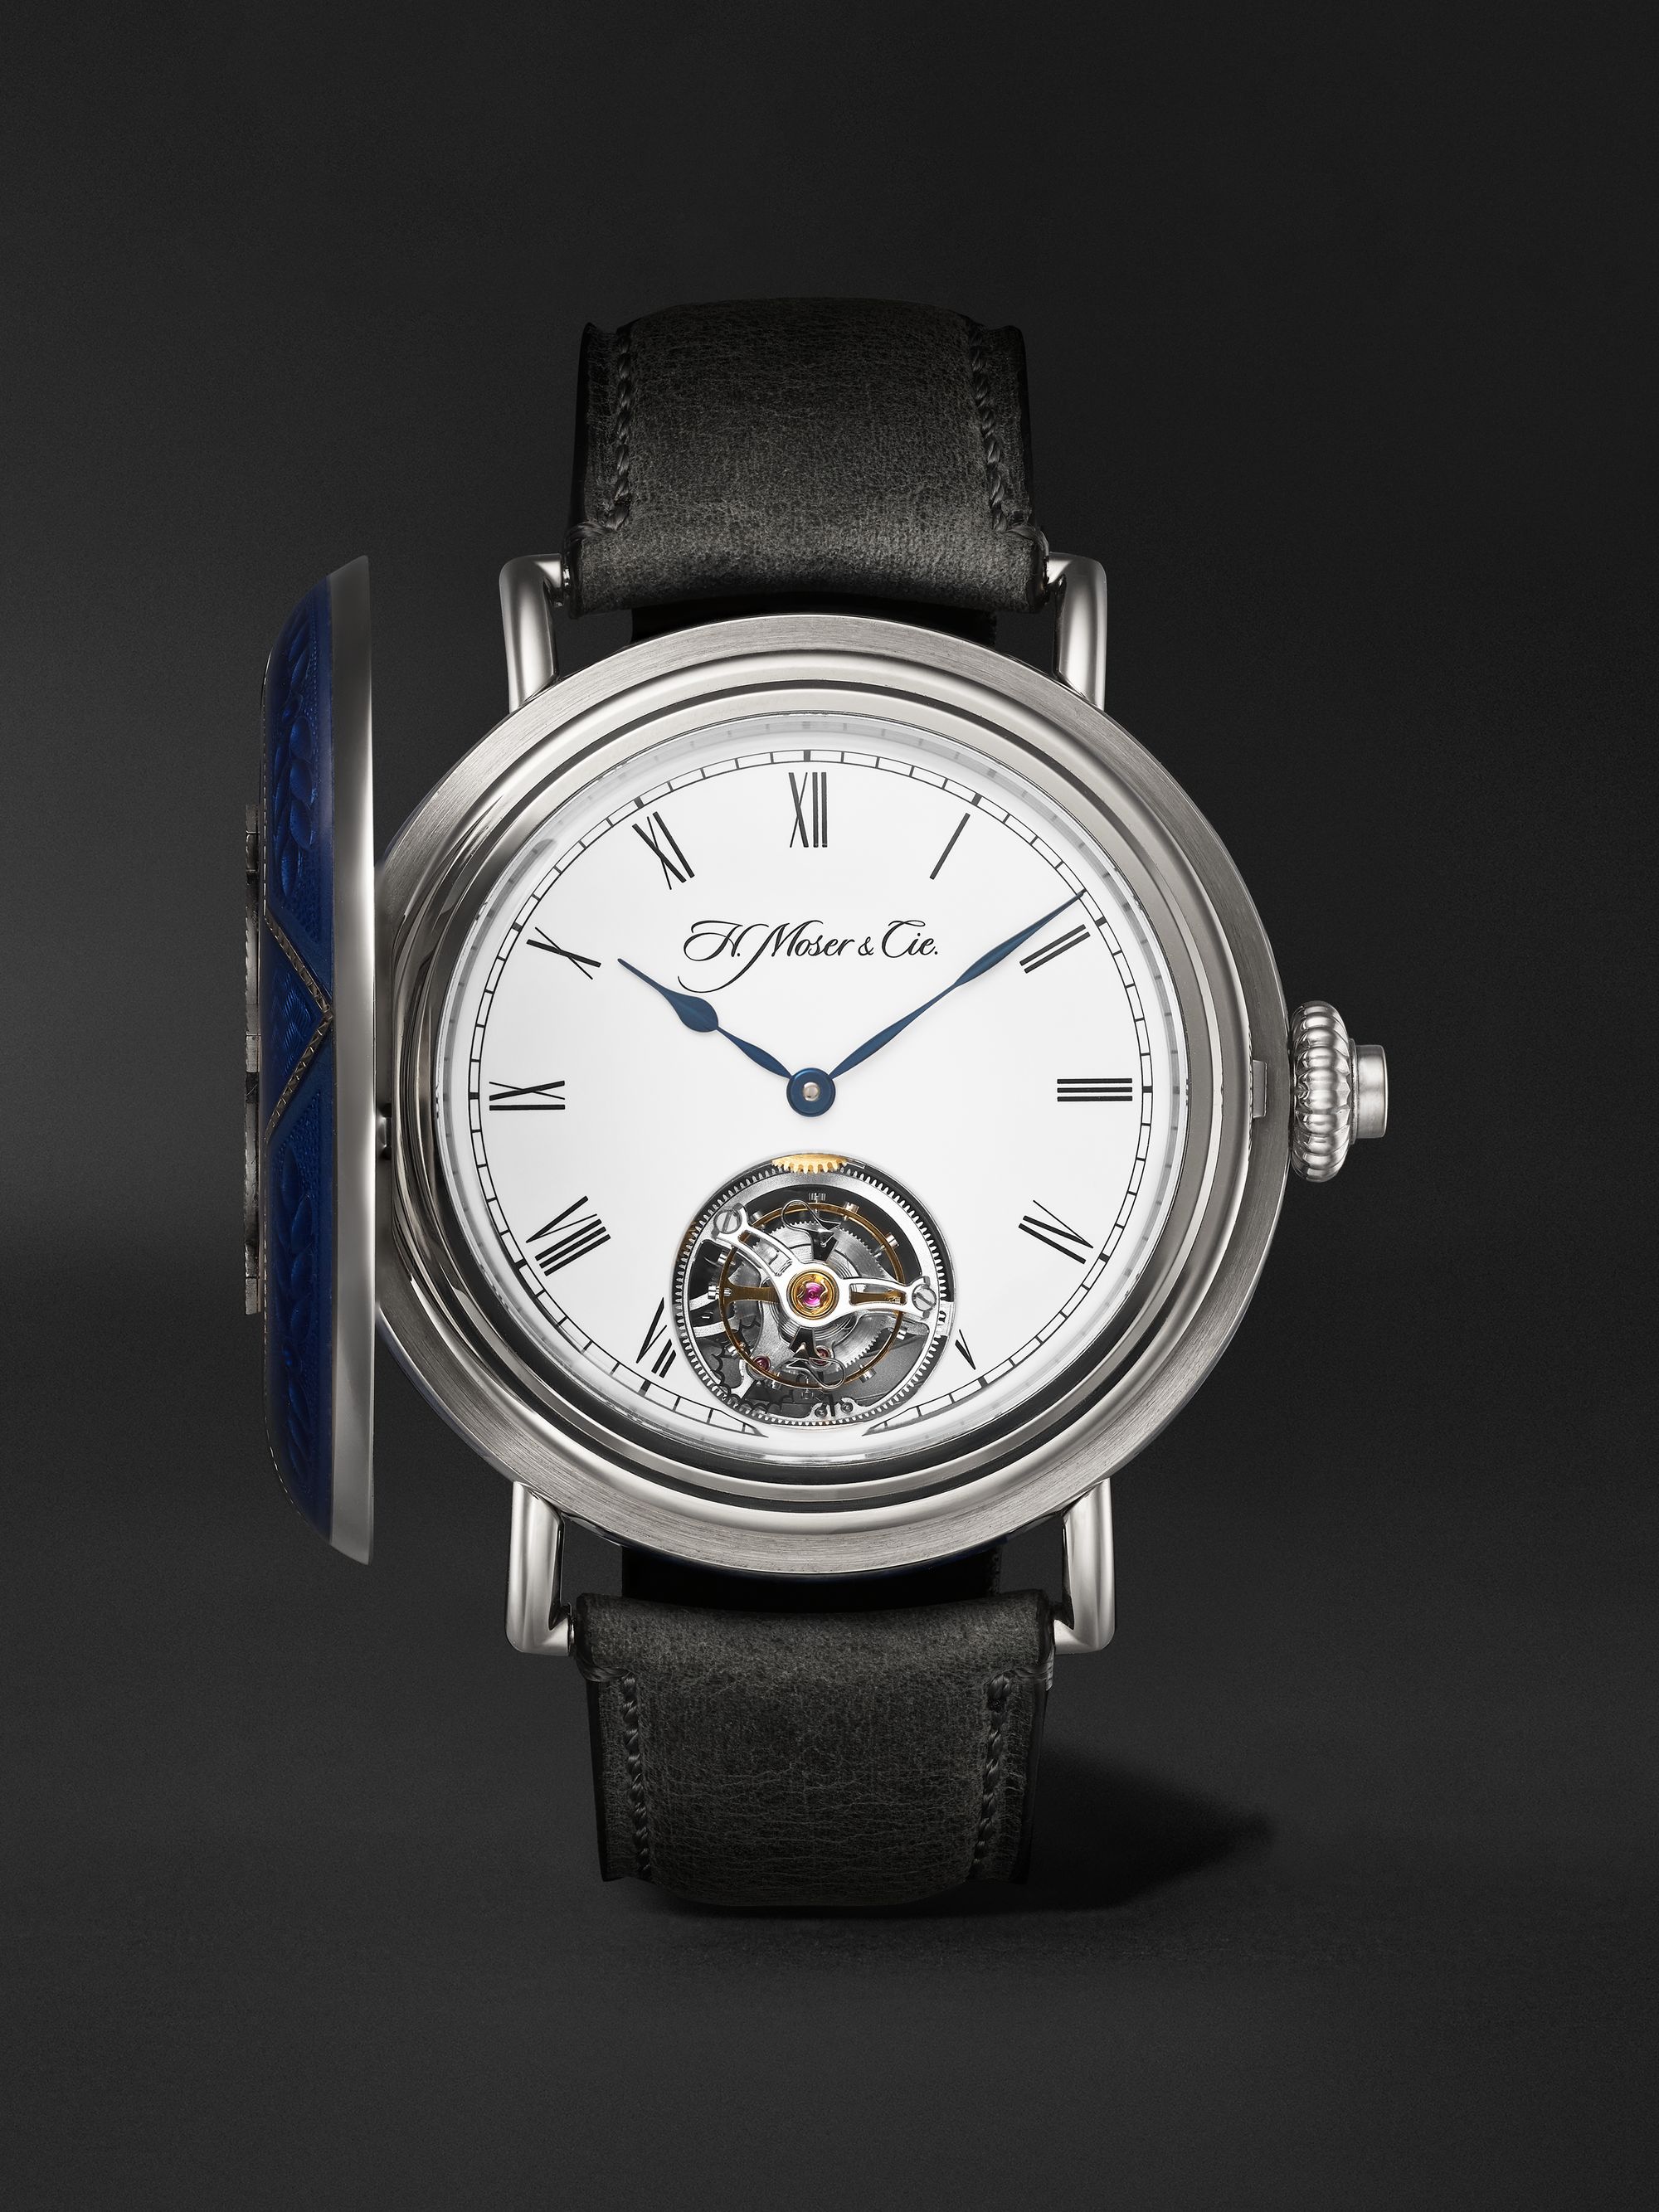 H. MOSER & CIE. Heritage Tourbillon 46mm 18-Karat White Gold and Leather Watch, Ref. No. 8804-0201